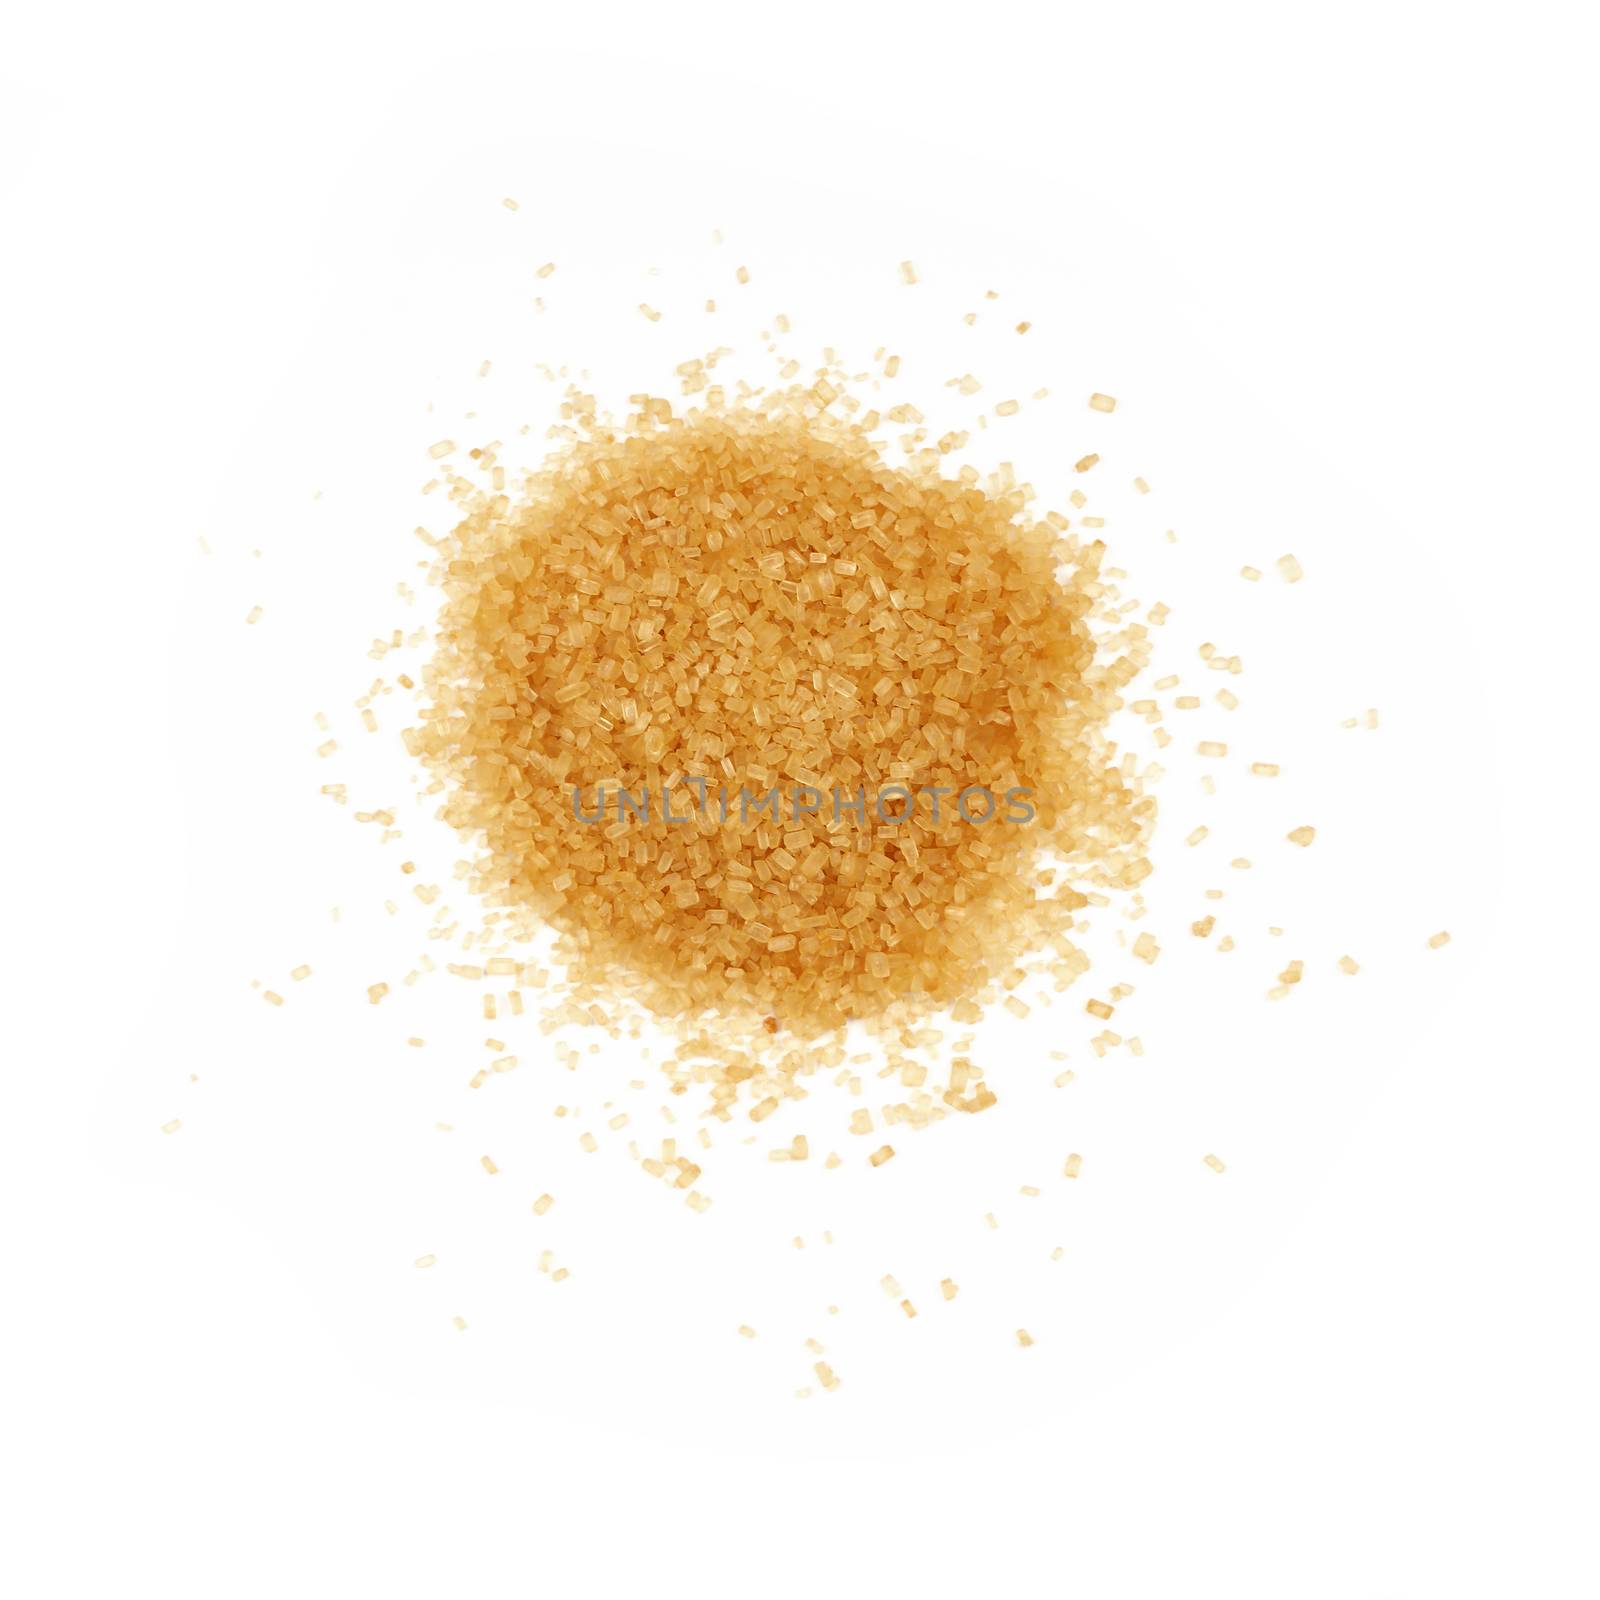 Pinch of brown cane sugar spilled around isolated on white background, close up, elevated top view